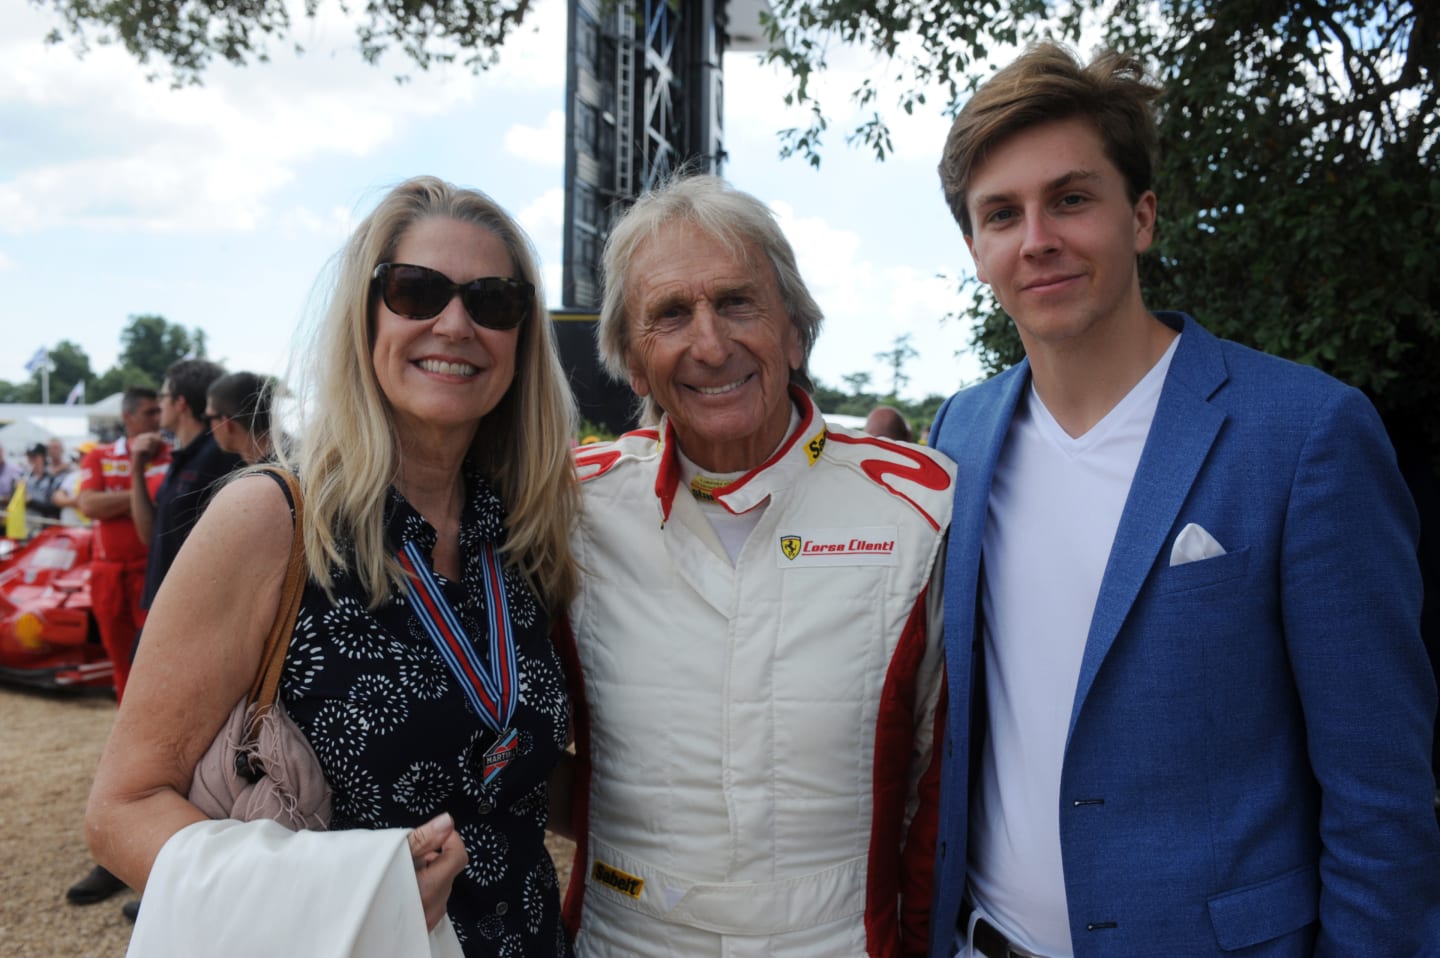 www.sutton-images.com Derek Bell (GBR) with Misti Bell (GBR) and Sebastian Bell (GBR) at Goodwood Festival of Speed, Goodwood, England, 30 June - 2 July 2017. © Sutton Images